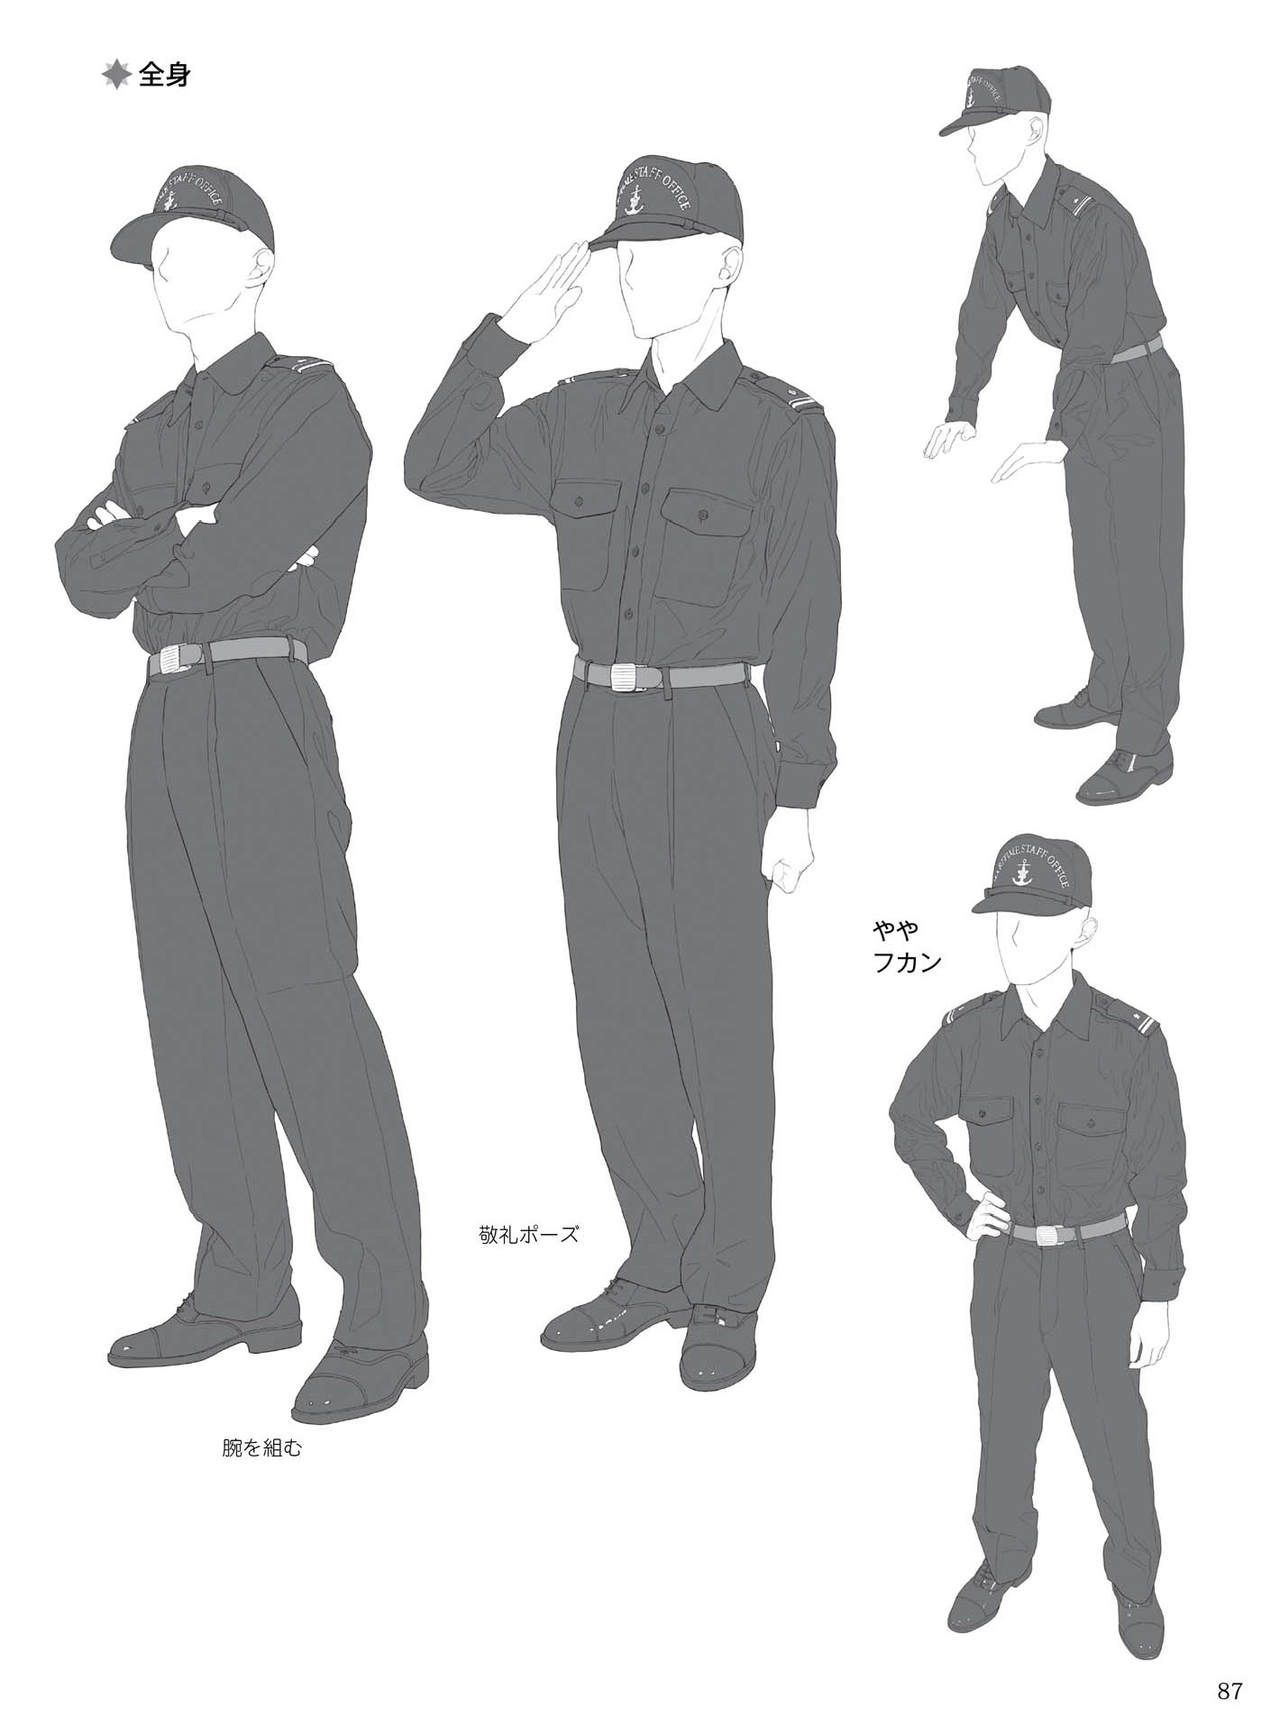 How to draw military uniforms and uniforms From Self-Defense Forces 軍服・制服の描き方 アメリカ軍・自衛隊の制服から戦闘服まで 90